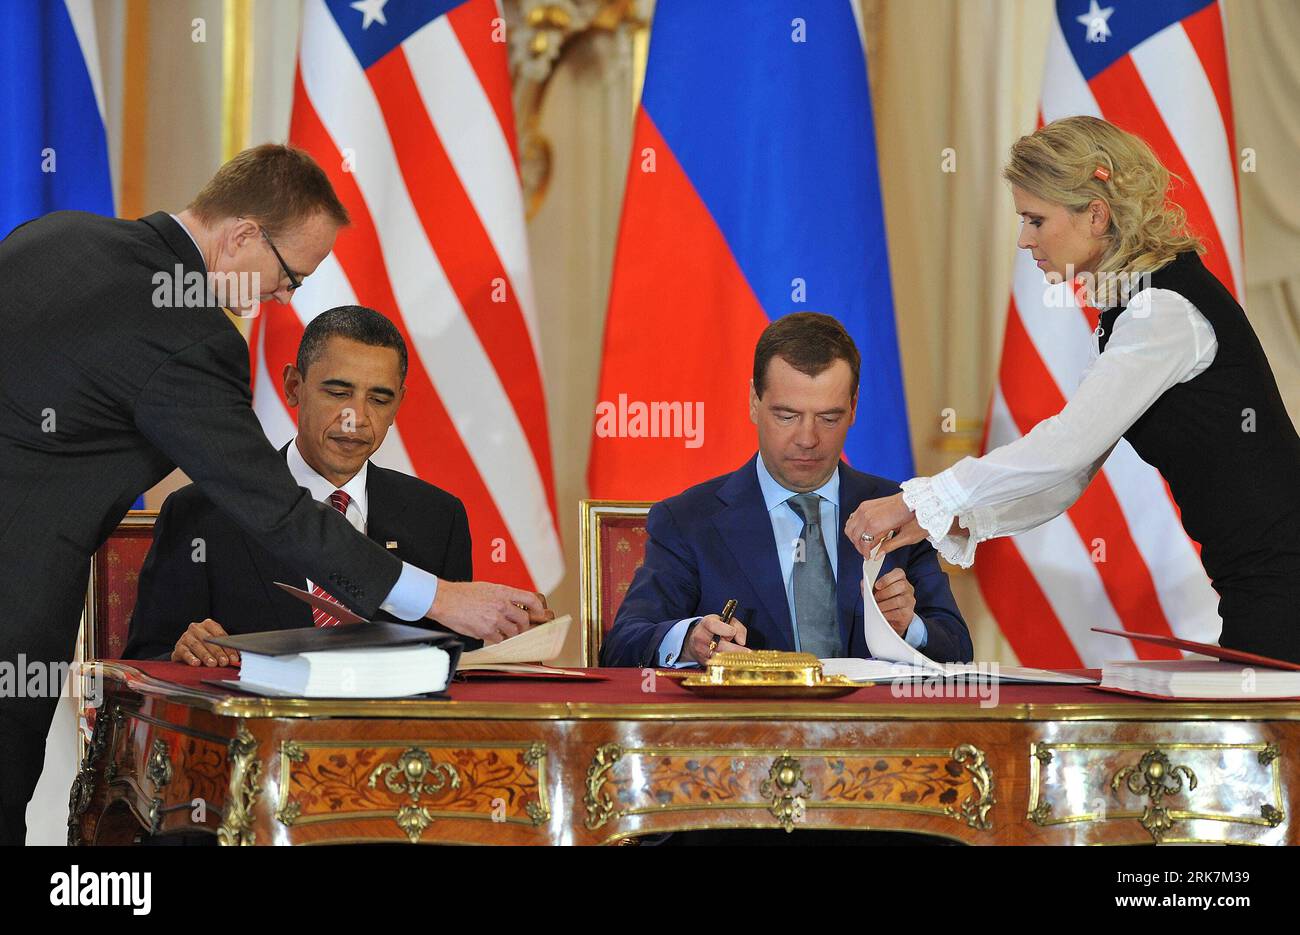 Bildnummer: 53927167  Datum: 08.04.2010  Copyright: imago/Xinhua (100408) -- PRAGUE, April 8, 2010 (Xinhua) -- U.S. President Barack Obama (L) and his Russian counterpart Dmitry Medvedev sign a landmark nuclear arms reduction treaty in Prague, capital of Czech Republic, on April 8, 2010. Under the new pact, the two countries agreed to reduce their deployed nuclear warheads to 1,550 each, or 30 percent below the current level of 2,200, and cut the launchers below 700 each.(Xinhua/Wu Wei) (lyx) (14)CZECH-PRAGUE-RUSSIA-US-TREATY PUBLICATIONxNOTxINxCHN People Politik Prag Abrüstung Abrüstungsgipfe Stock Photo